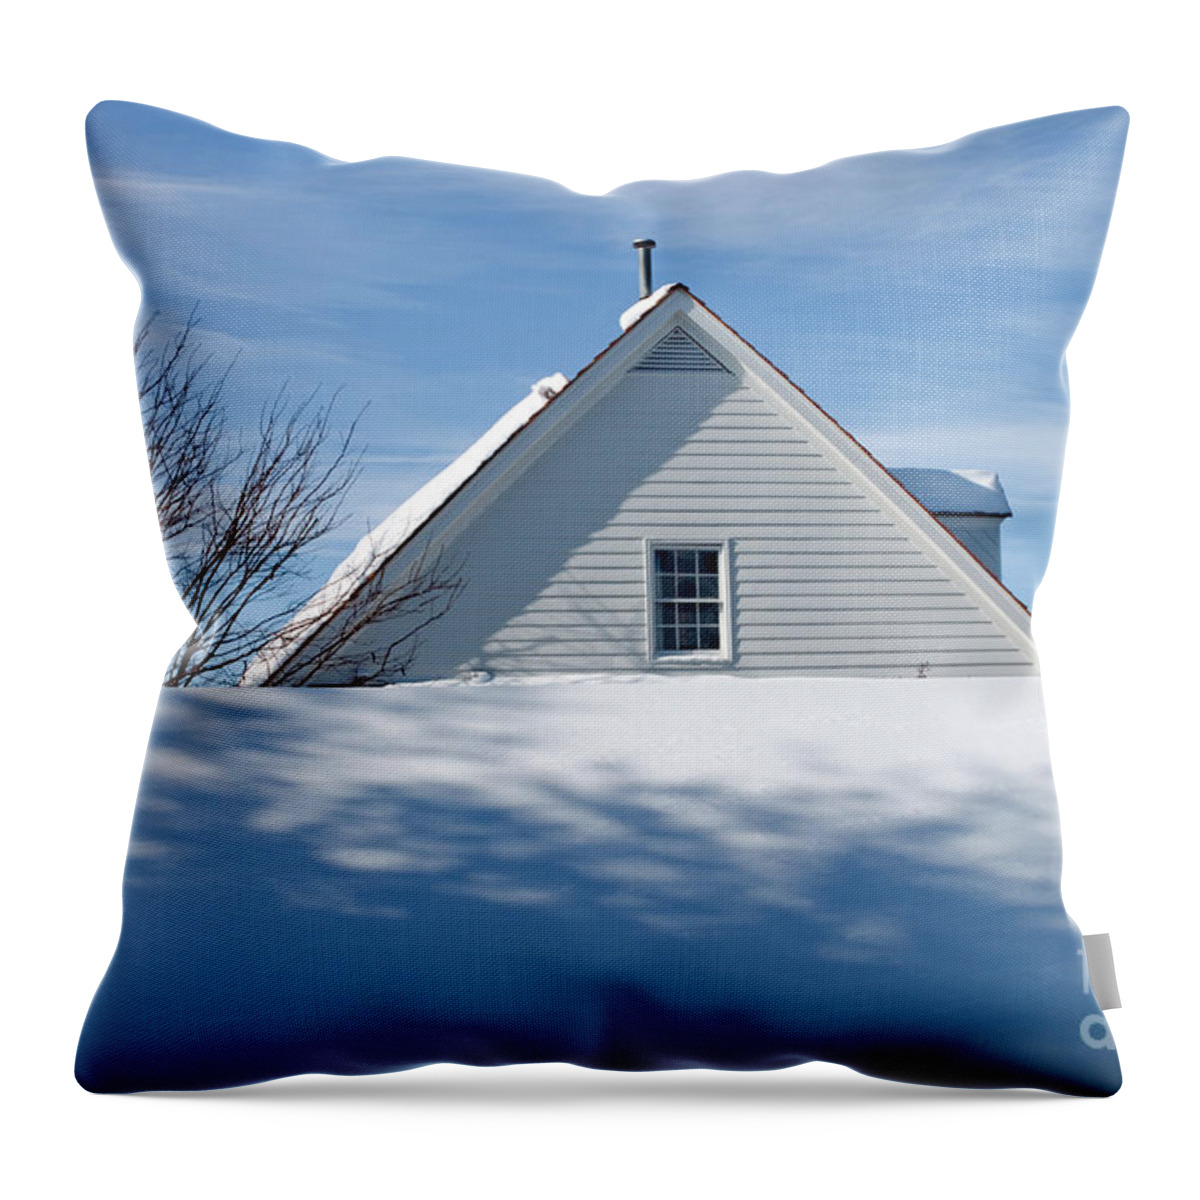 Snow Throw Pillow featuring the photograph After the Snowfall by Thomas Marchessault